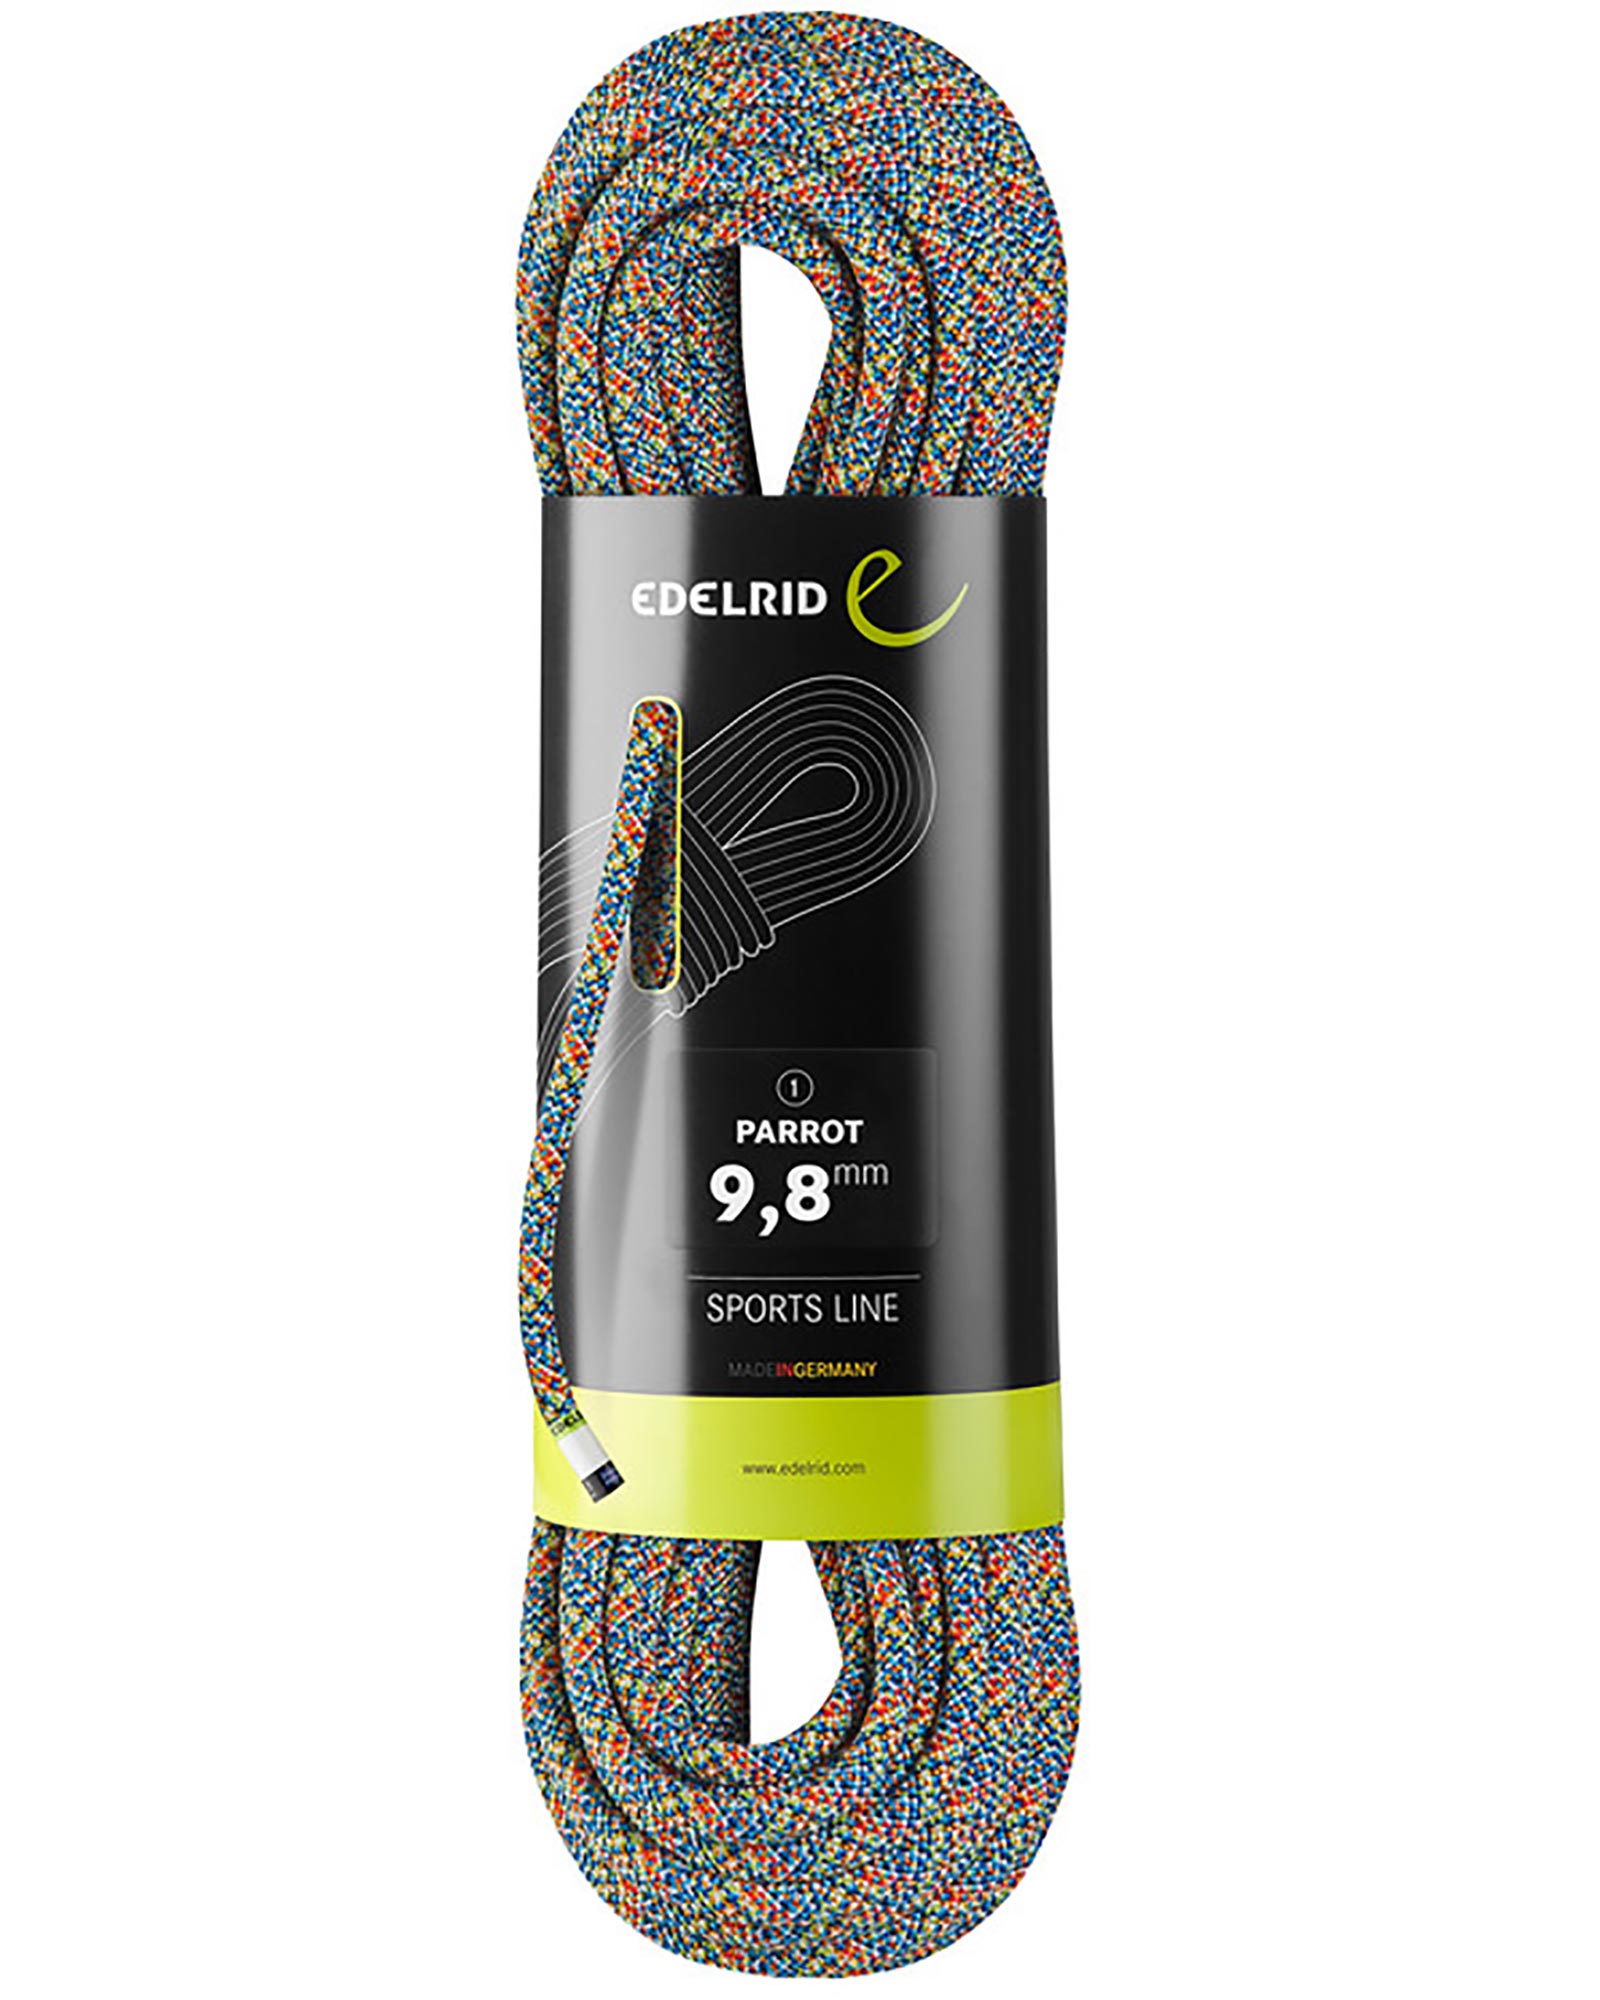 Edelrid Parrot 9.8mm x 50m Rope - Assorted 50m